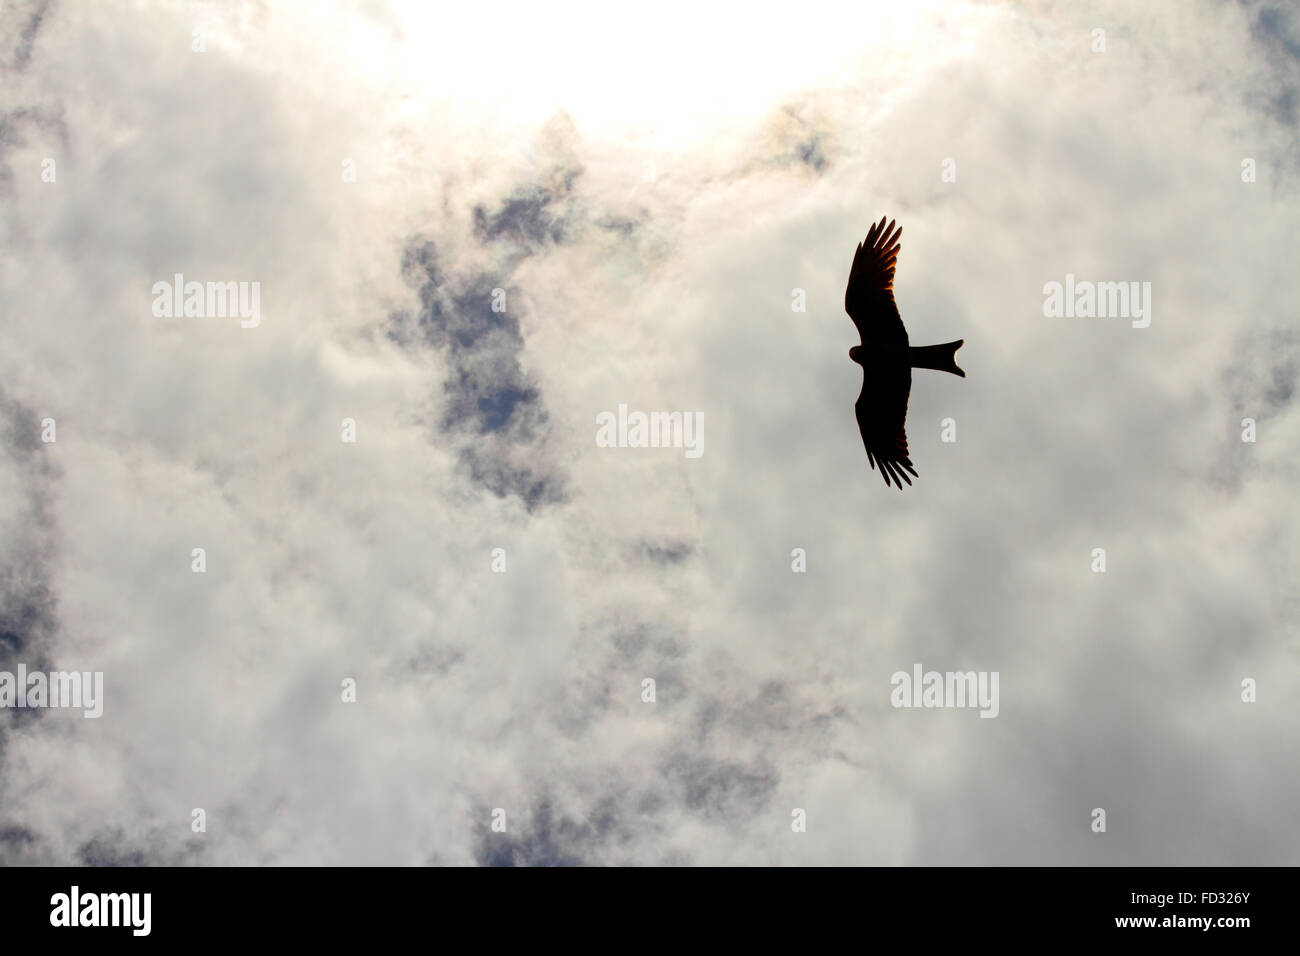 The silhouette of a hawk flying in the clouds high above Stock Photo